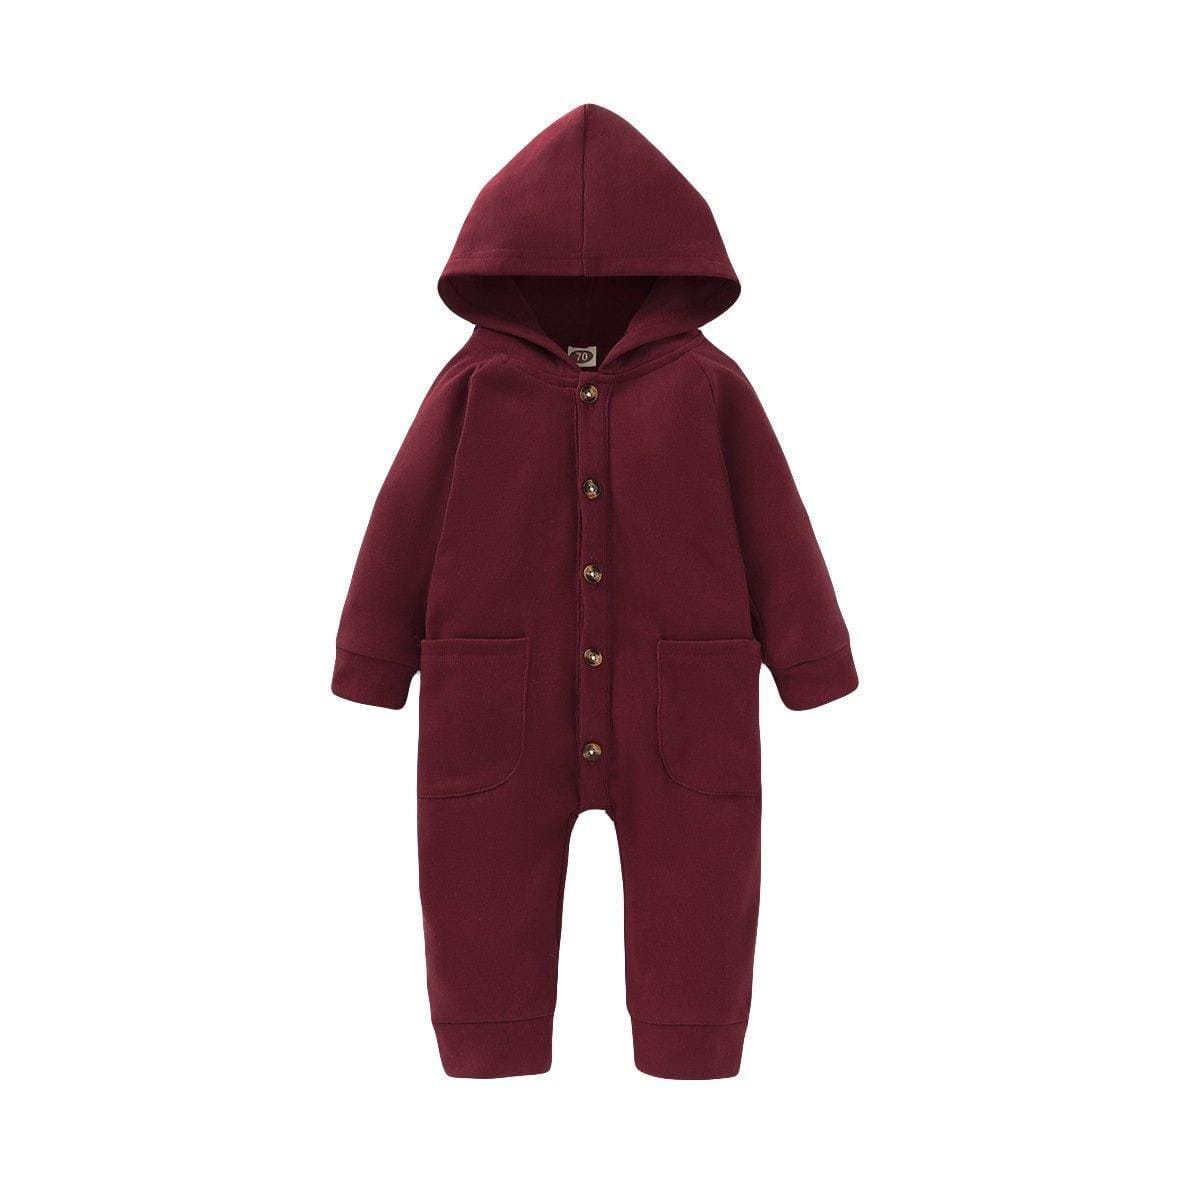 ezy2find baby clothing Wine red / 70 Solid color romper